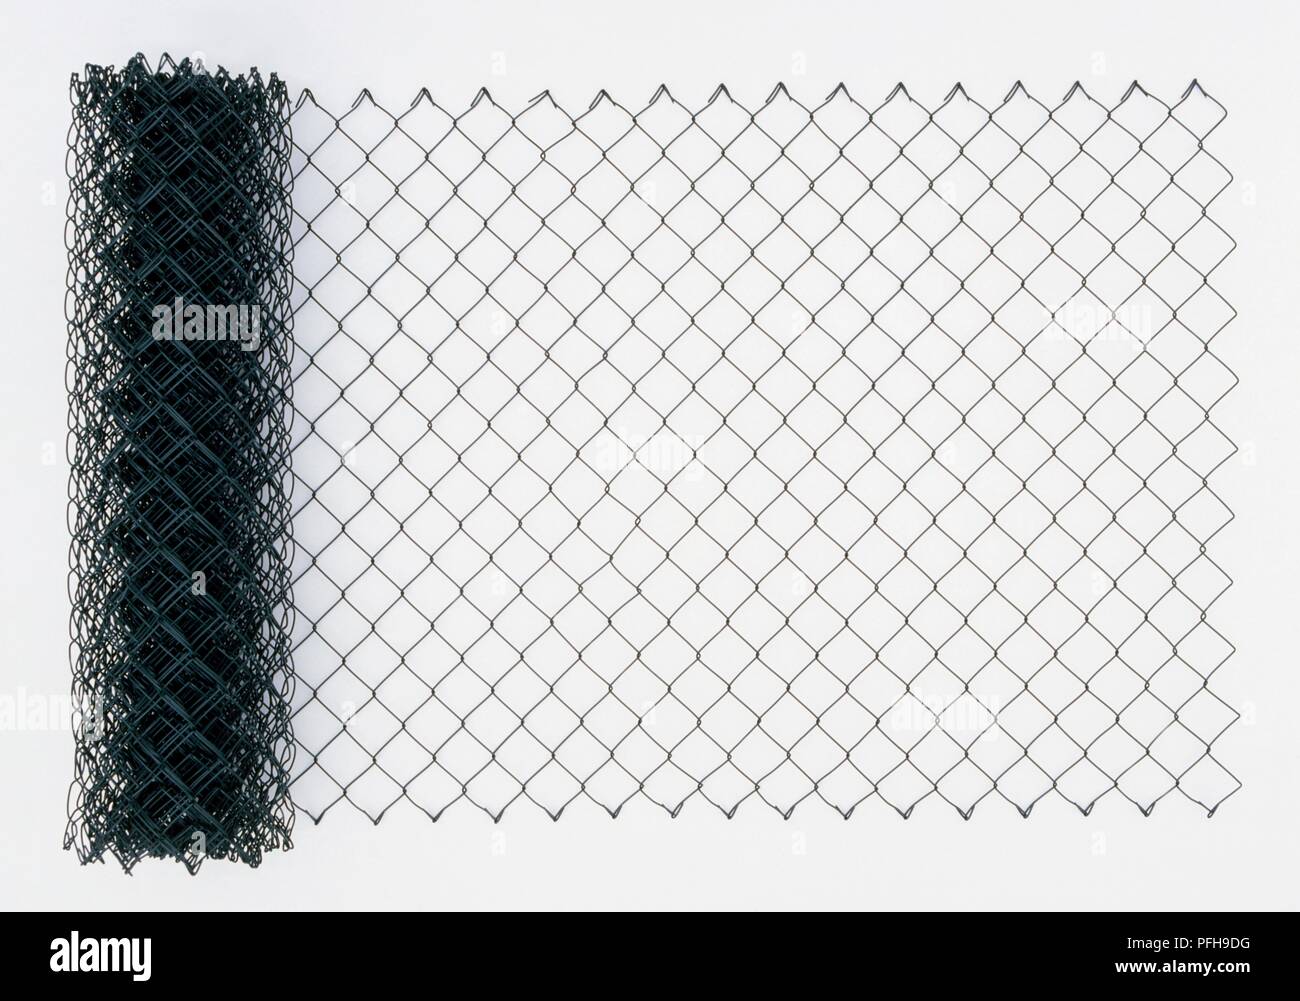 Roll of chain link fencing Stock Photo